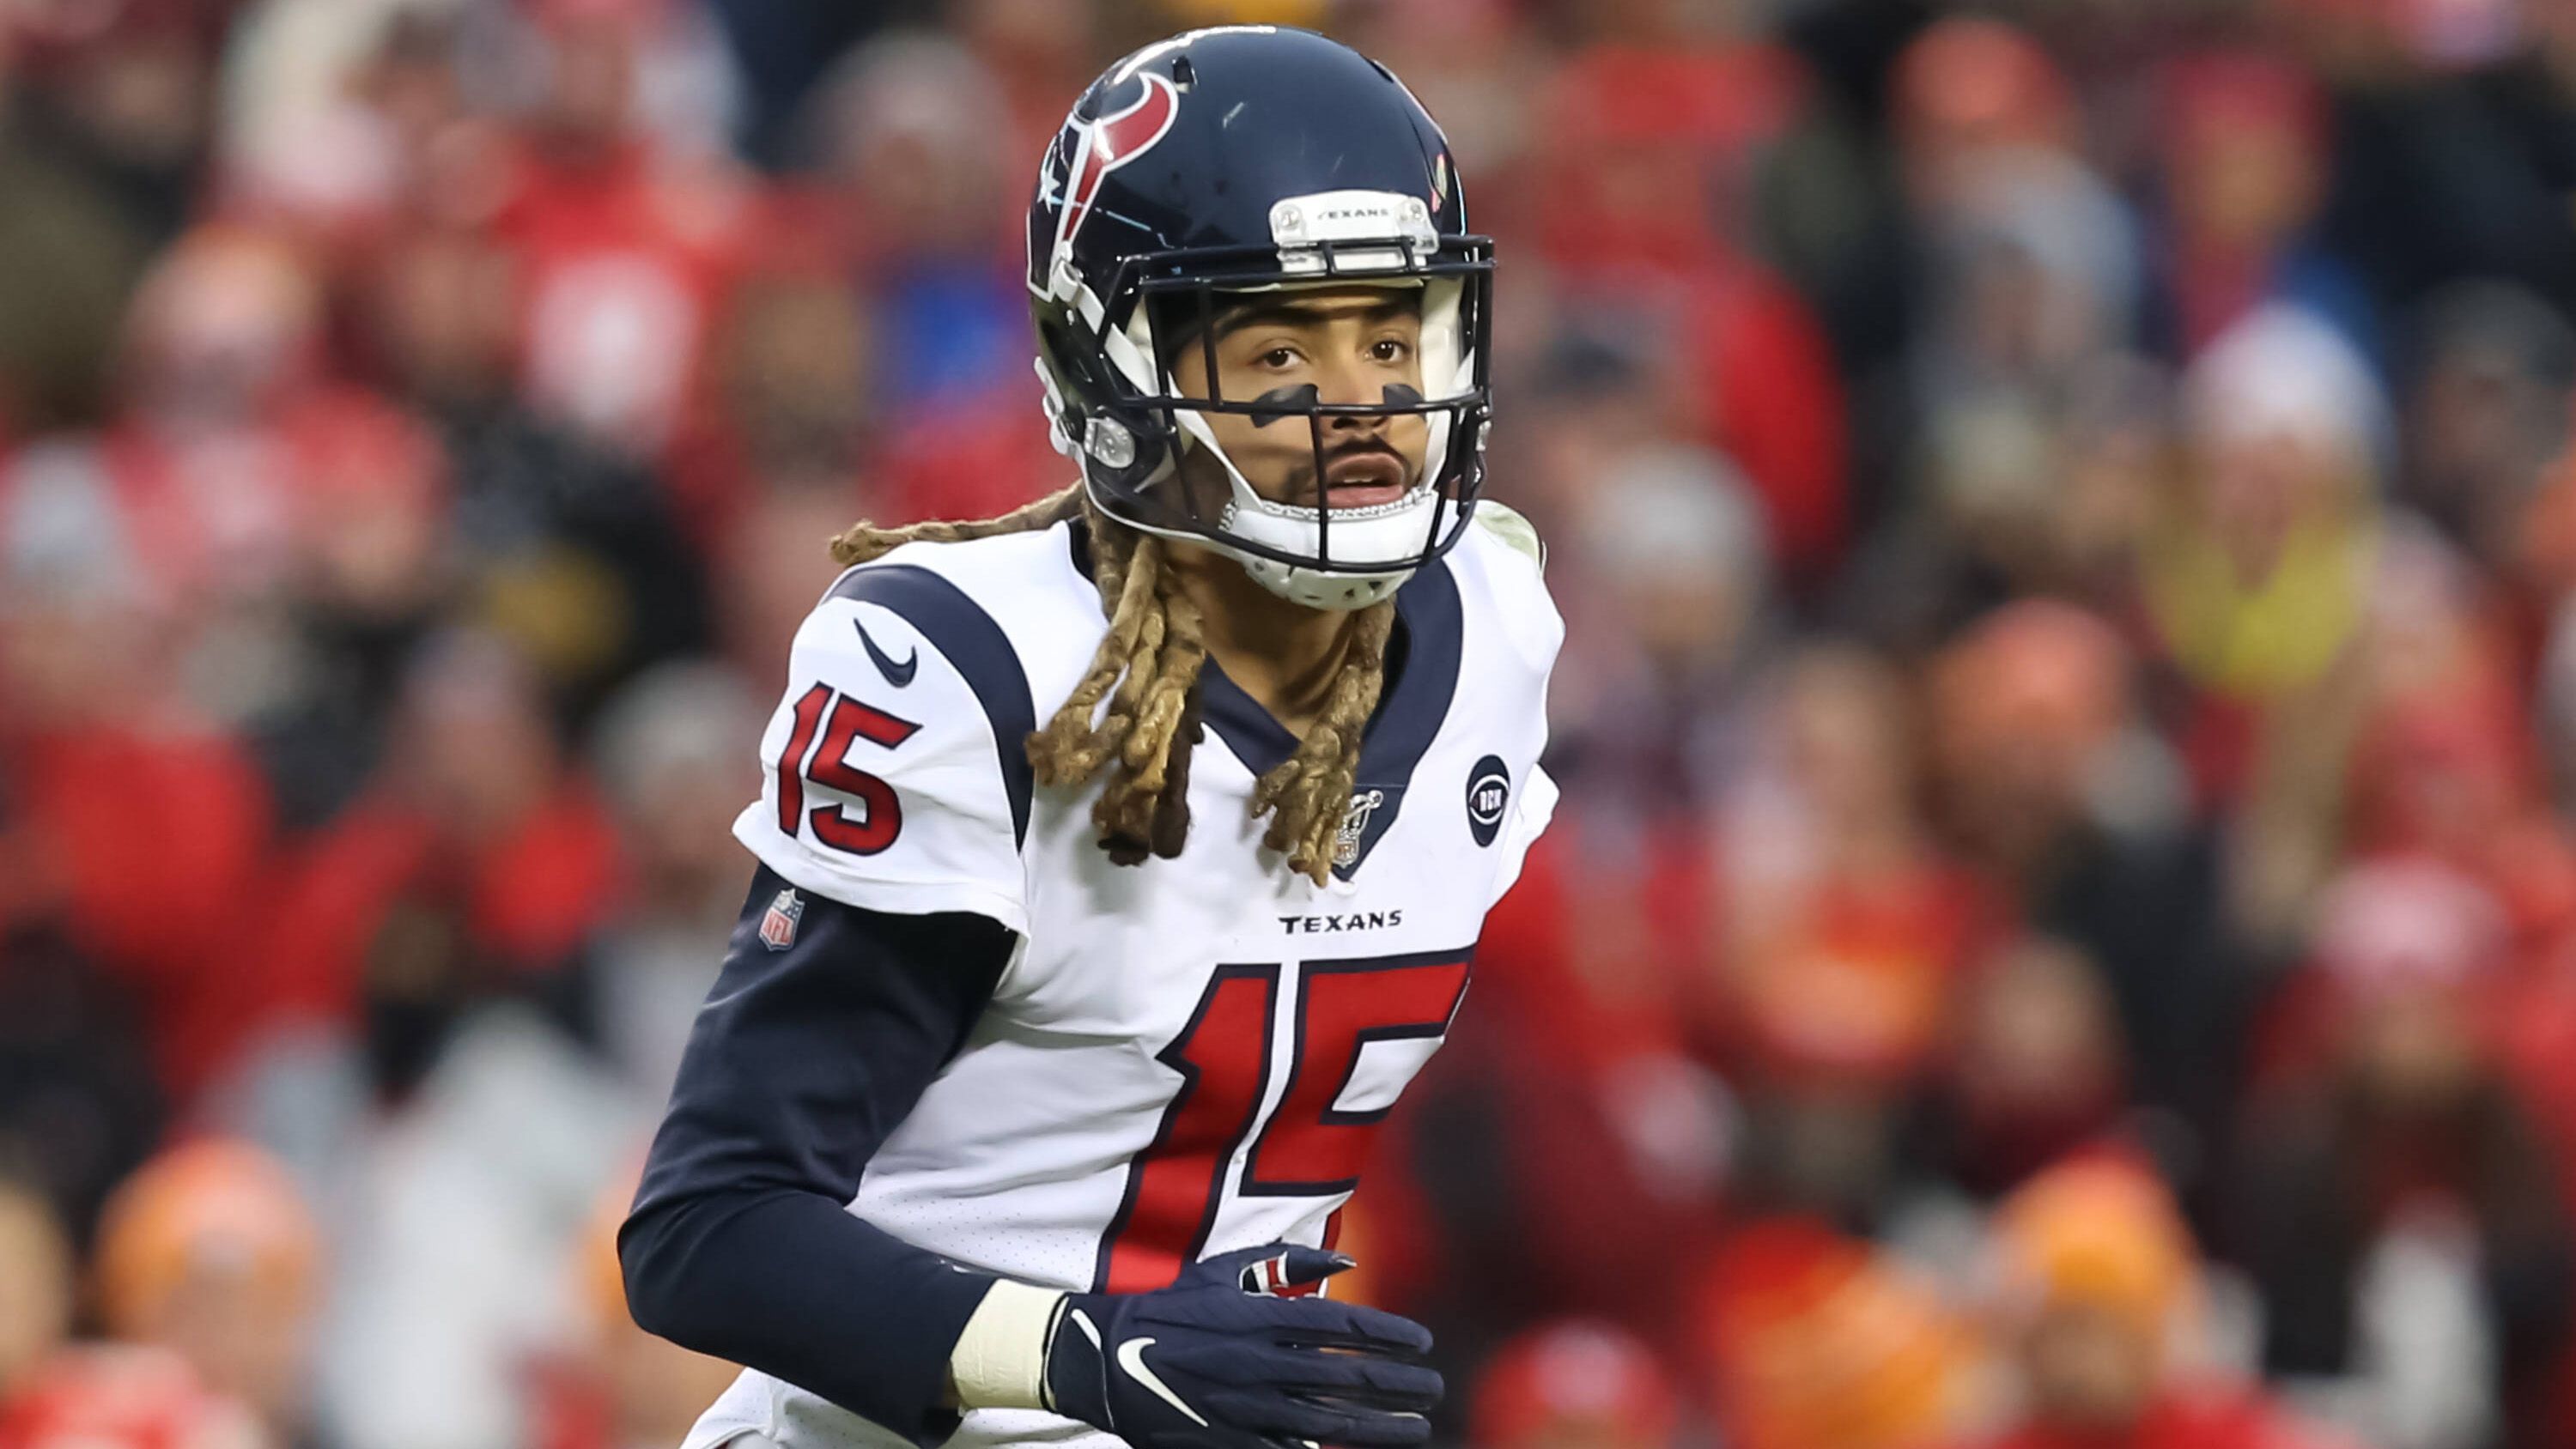 
                <strong>Will Fuller V. (Miami Dolphins - Wide Receiver)</strong><br>
                &#x2022; Alte Trikotnummer: 15 (Houston Texans) - <br>&#x2022; Neue Trikotnummer: 3<br>
              